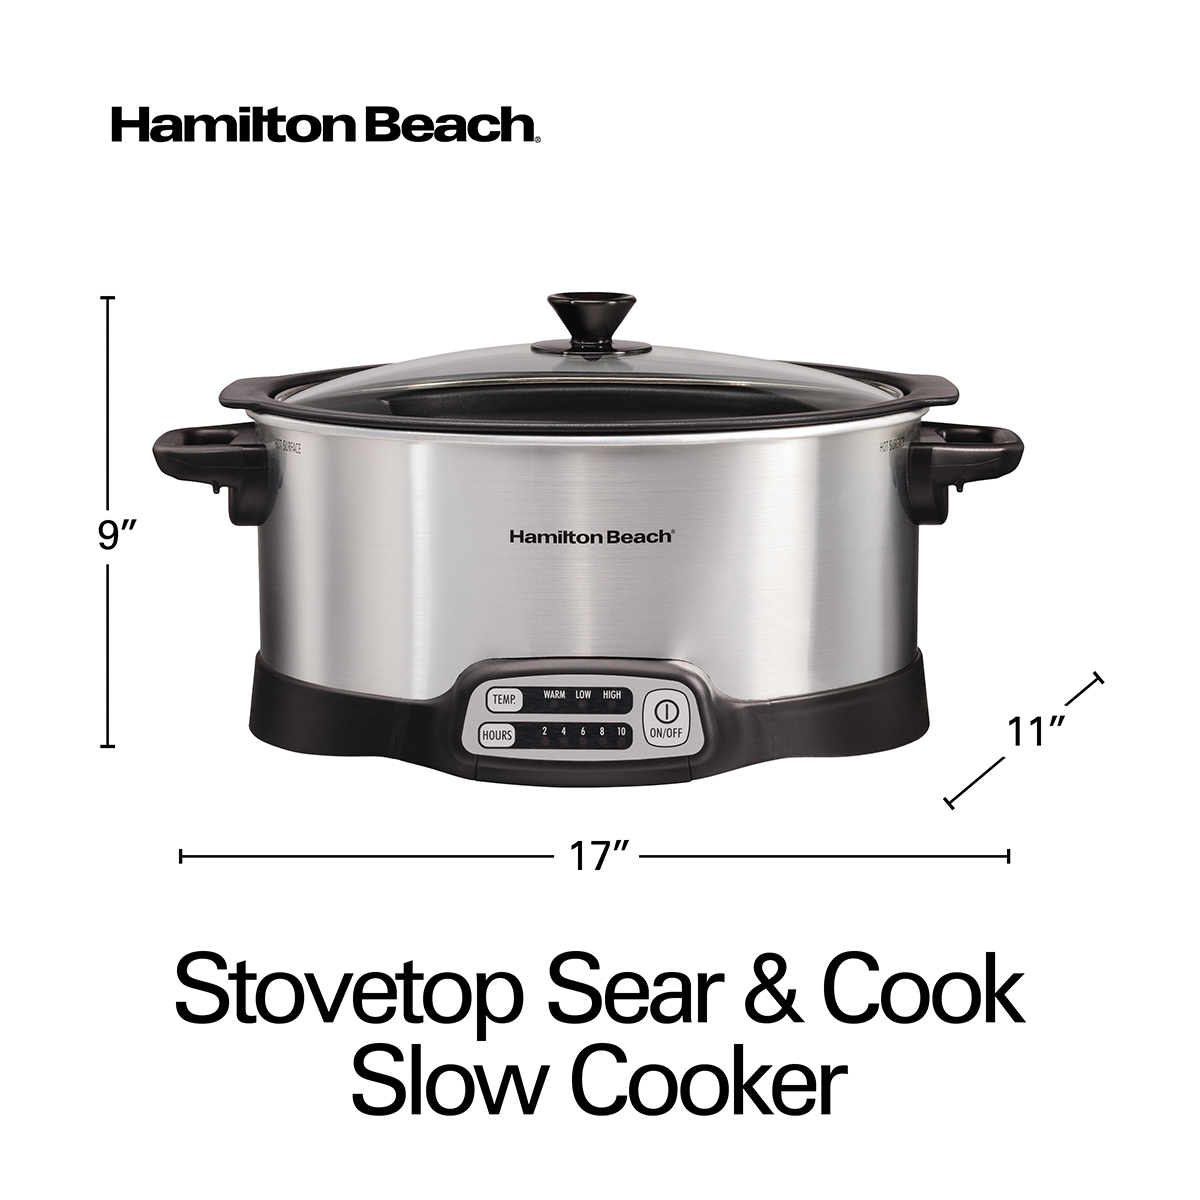 Hamilton Beach Sear & Cook Stock Pot Slow Cooker with Stovetop